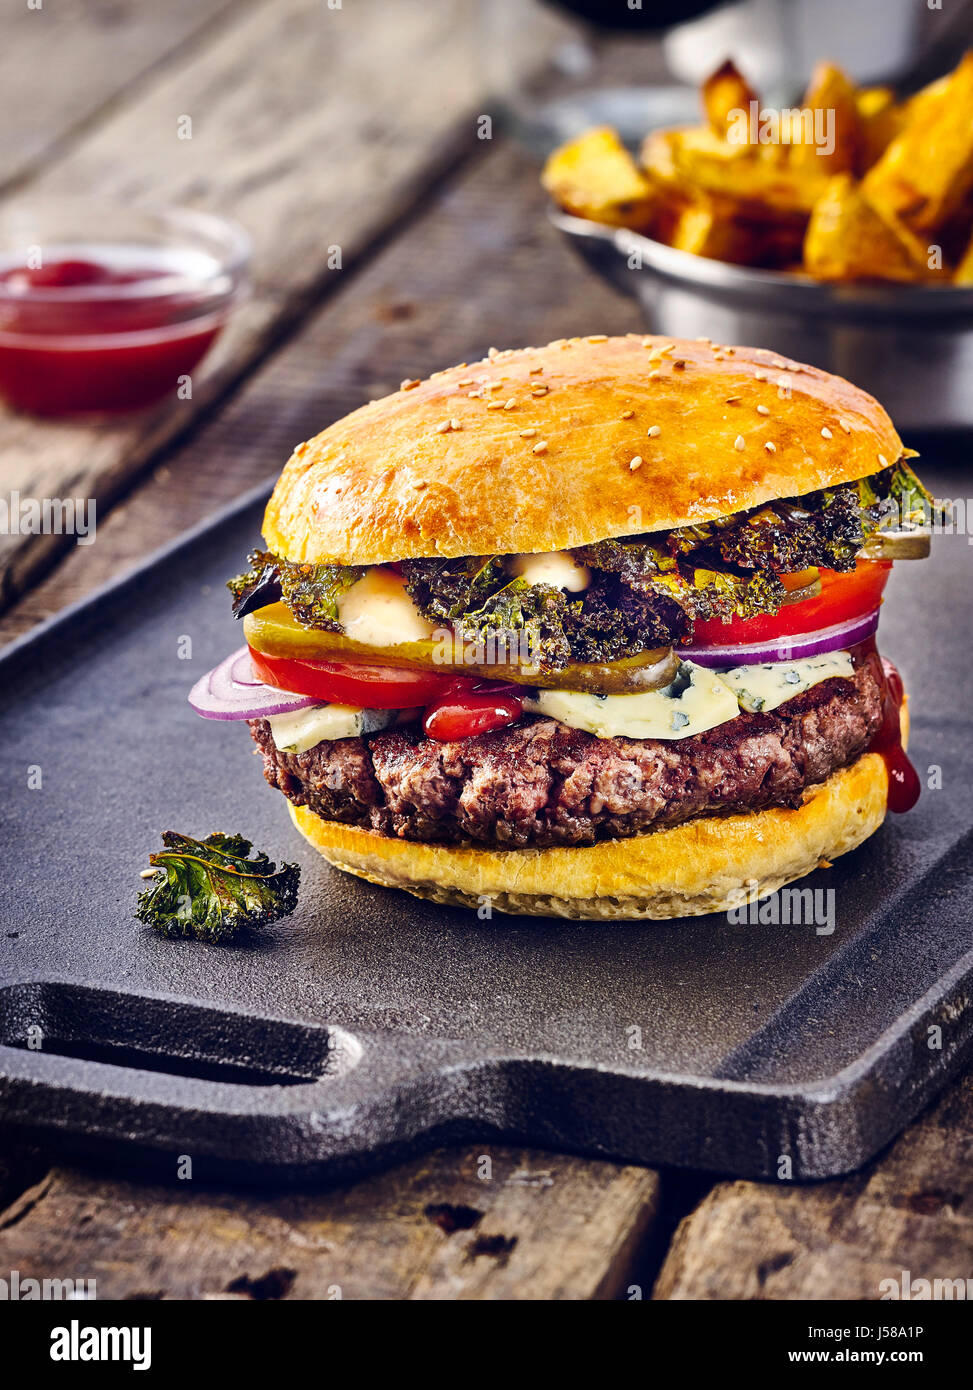 Burger with kale chips and potato wedges Stock Photo